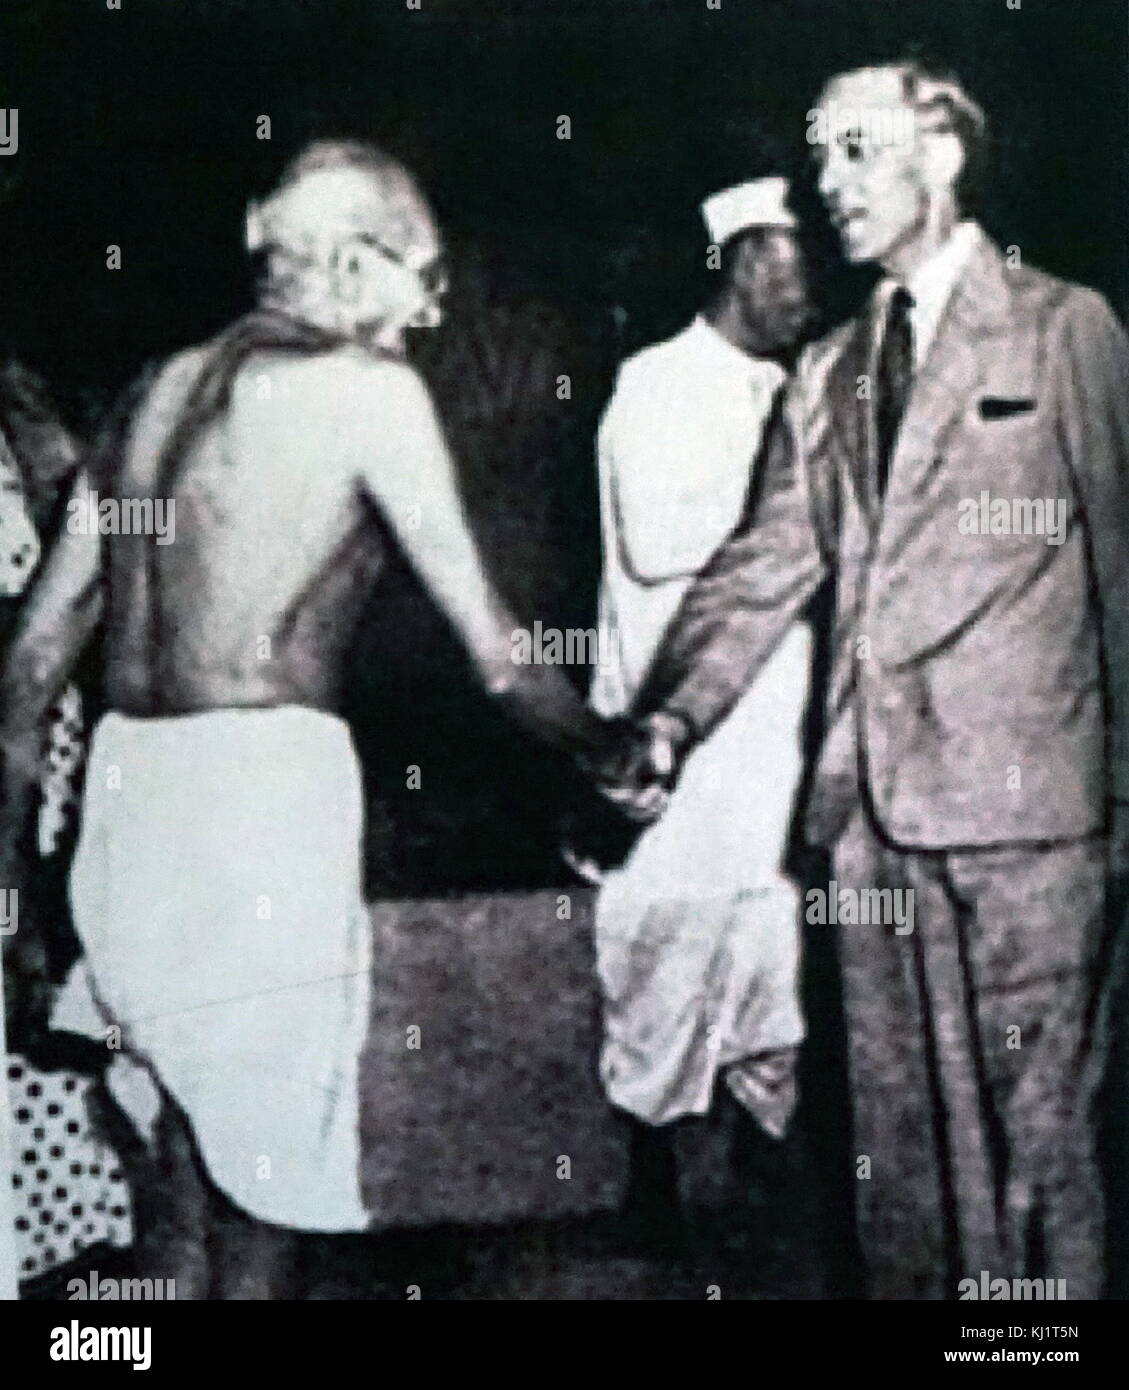 Stafford Cripps meets Mahatma Gandhi during his mission to India in March 1942 after the fall of Singapore in Feb 1942. The mission failed to engage successfully with leaders of the Indian independence movement. Sir Richard Stafford Cripps, (1889 – 1952), was a British Labour politician of the first half of the 20th century. Stock Photo